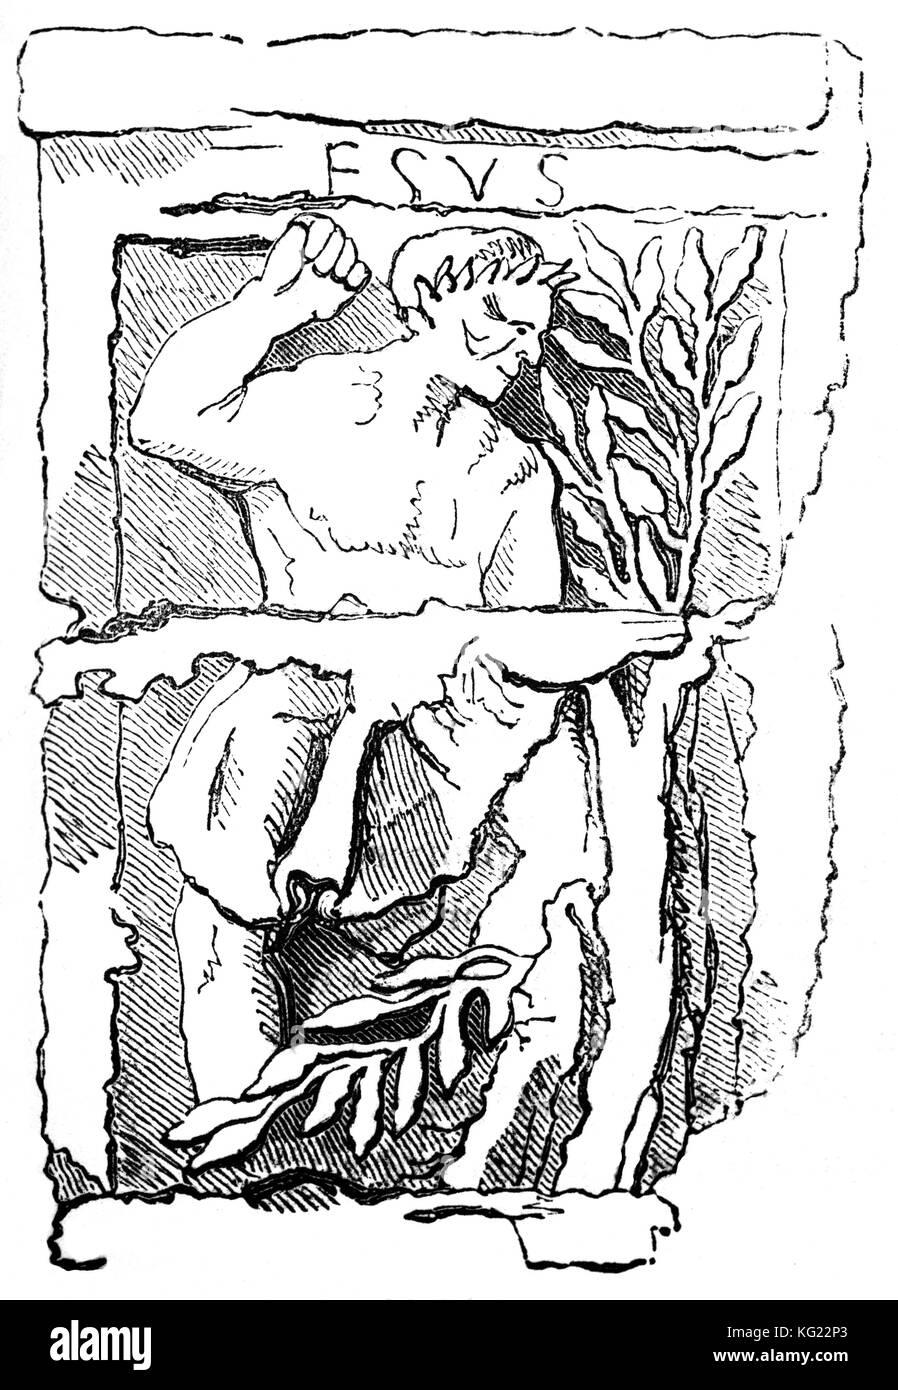 A drawing of Hesus, Aisus or  Esus, a Gaulish god celebrated on the 'Pillar of the Boatmen' dating fromthe first quarter of the 1st century AD, it originally stood in a temple in the Gallo-Roman civitas of Lutetia (modern Paris, France). He was a deity in Celtic polytheism, commonly known as Celtic paganism, to whom  human victims were sacrificed; practices adhered to by  Iron Age people of Western Europe now known as the Celts, roughly between 500 BCE and 500 CE. Stock Photo